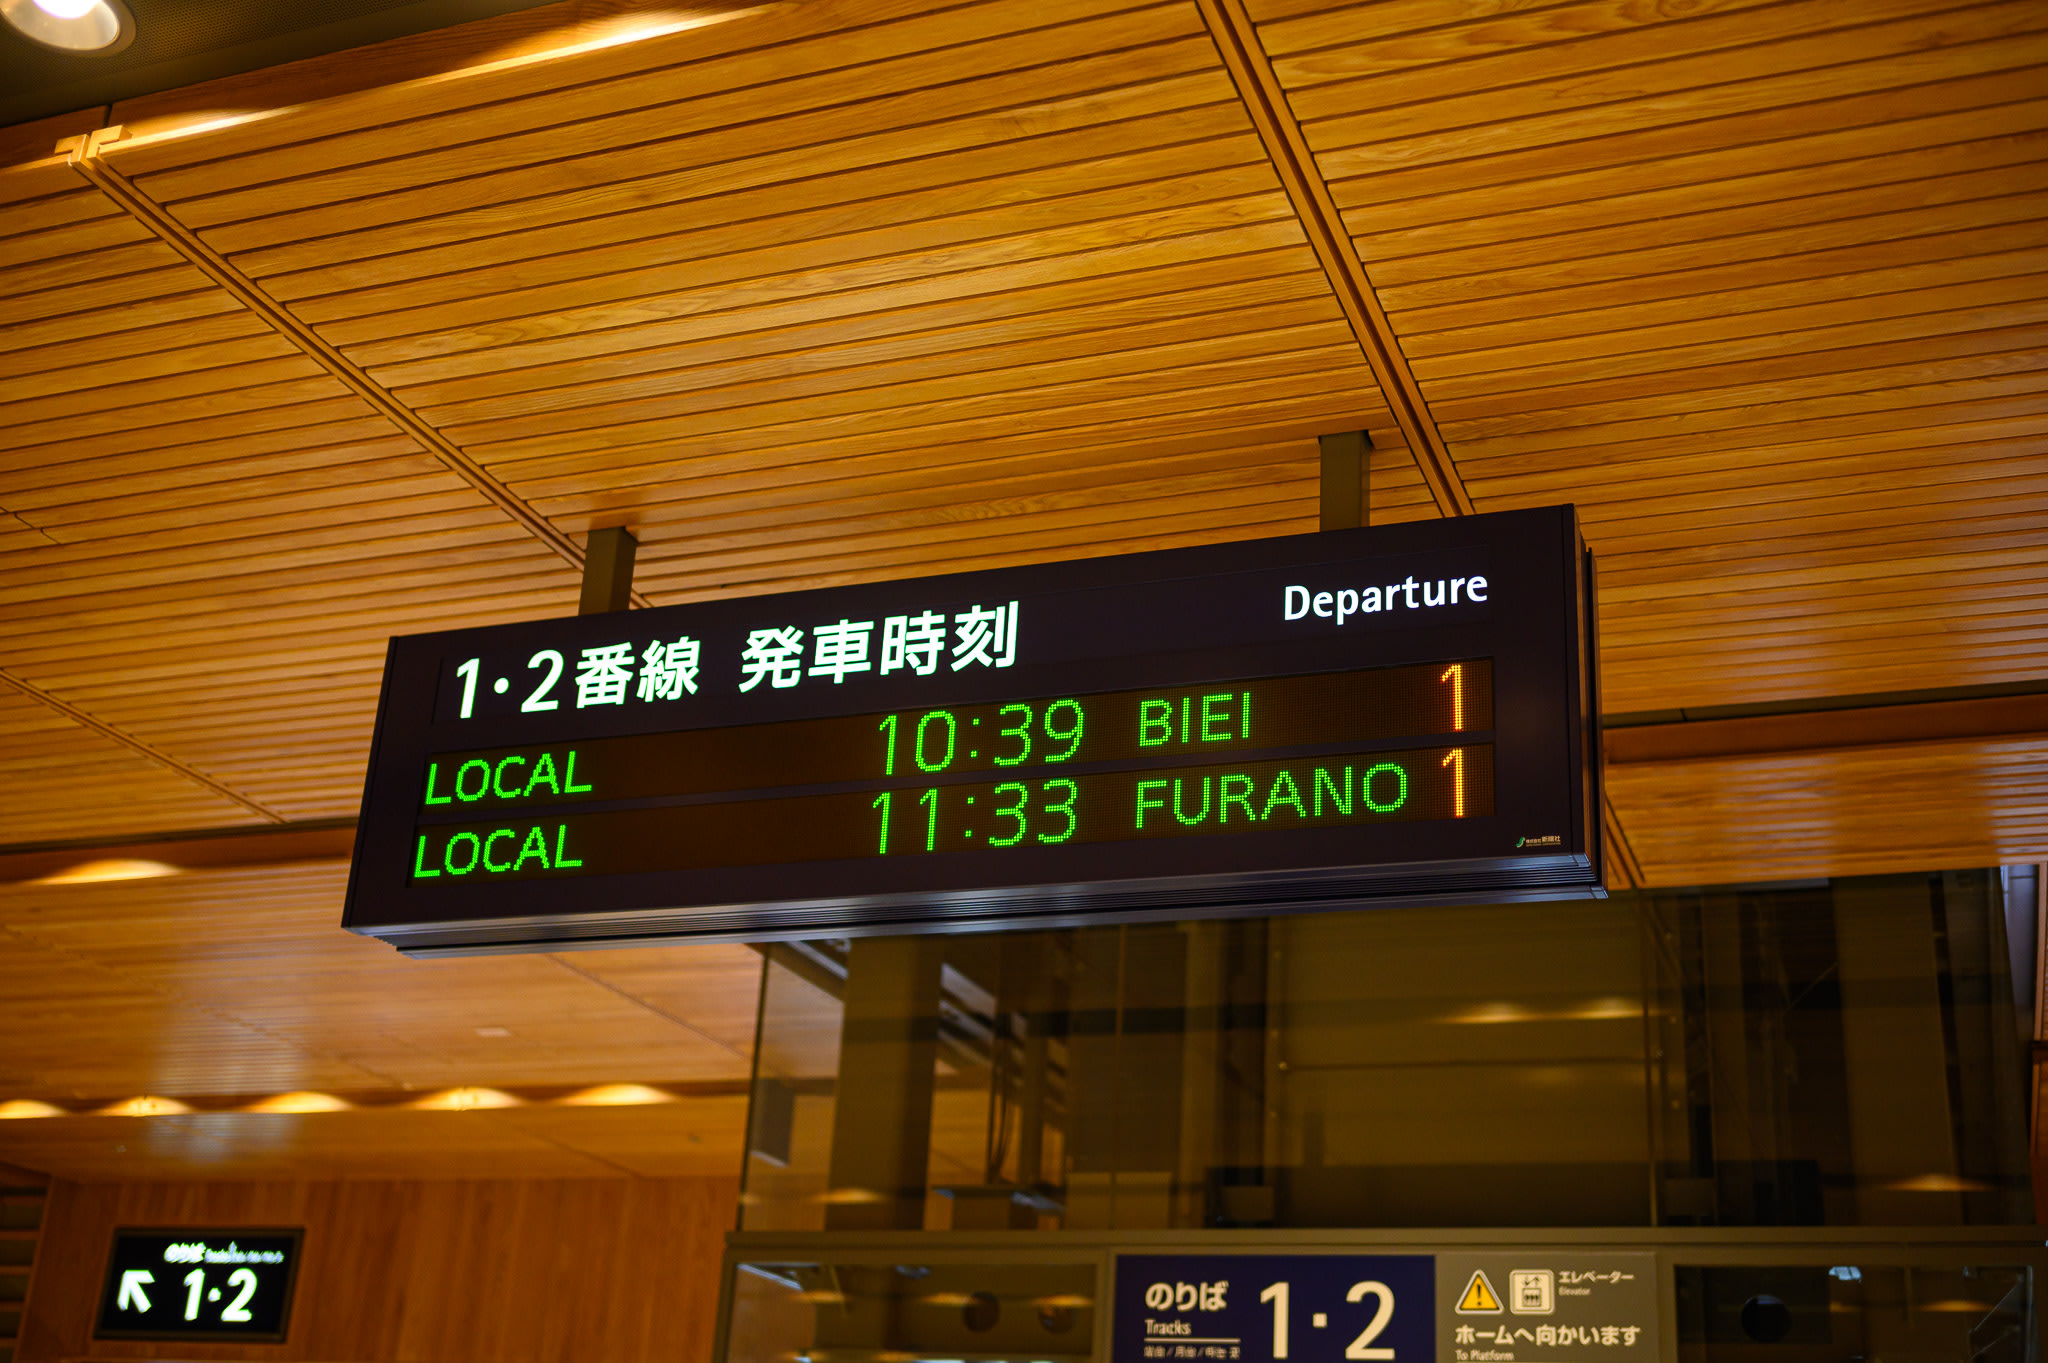 A billboard showing departures of local trains on the JR Furano line from Asahikawa. There is a departure bound for Biei at 10:39, and the next train is bound for Furano at 11:33.